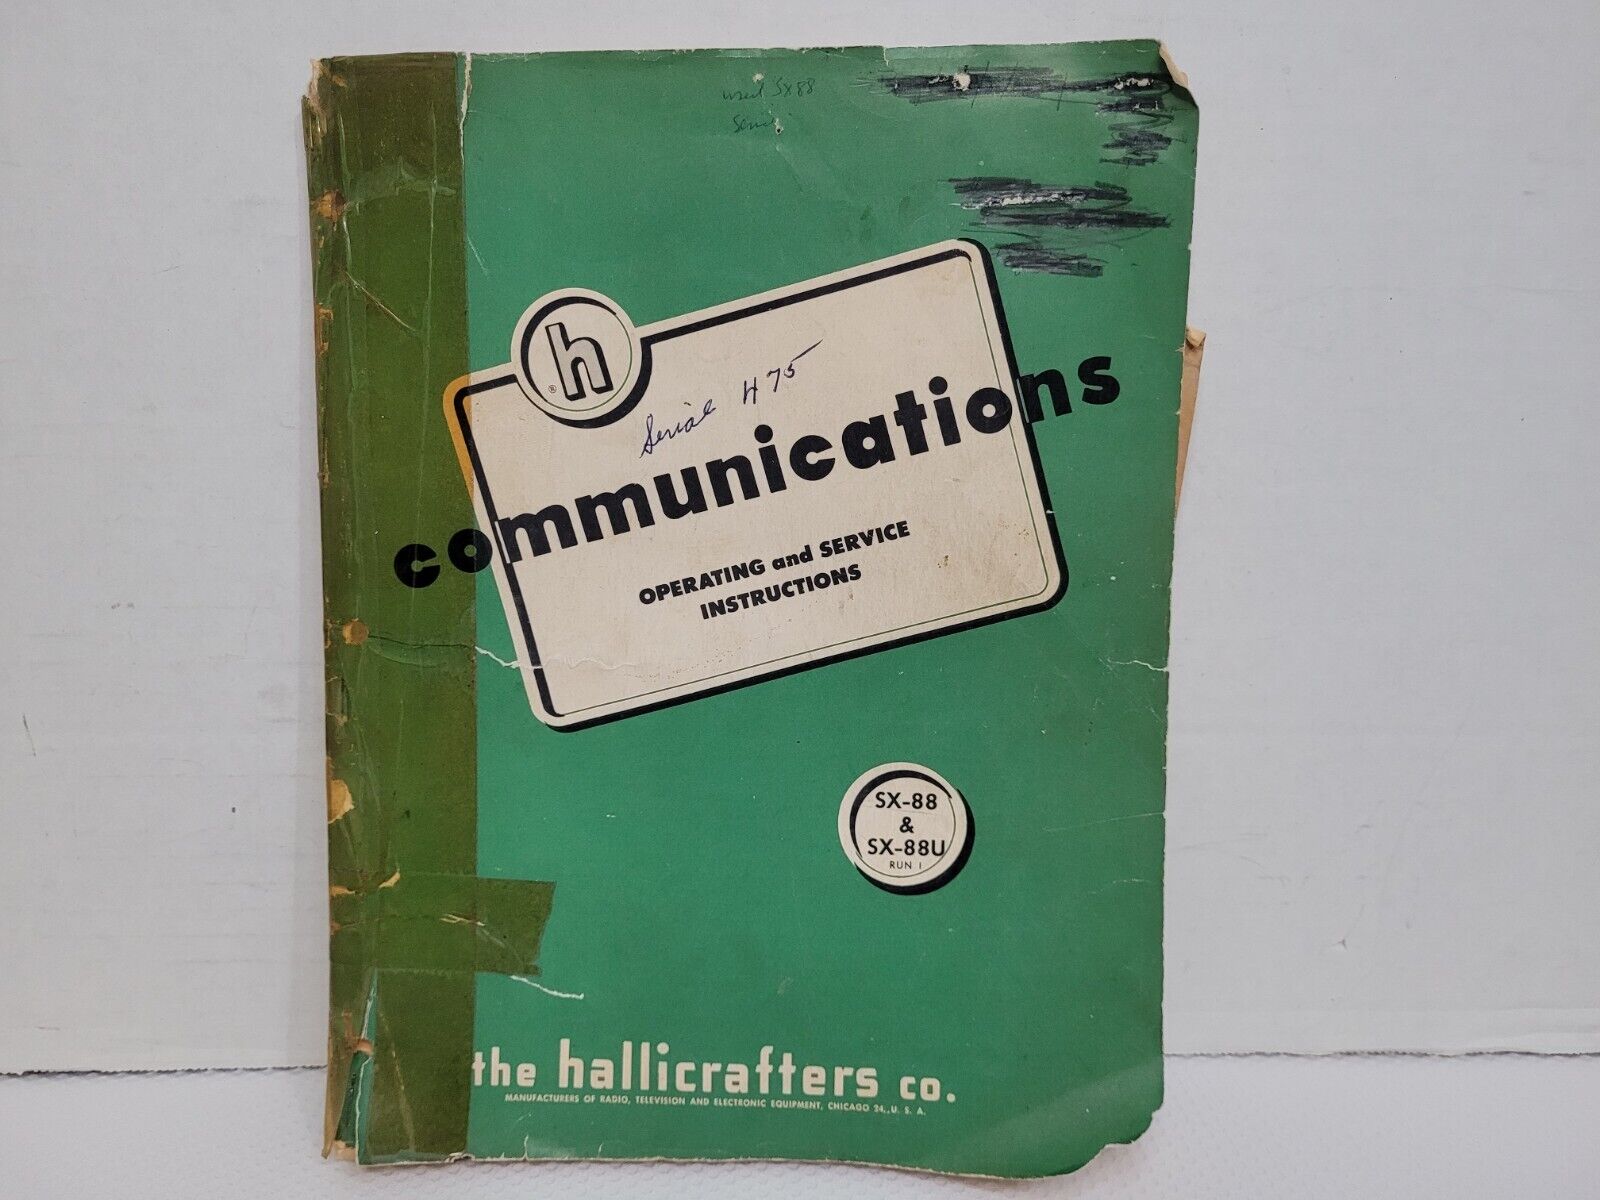 Hallicrafters SX-88 SX-88U Communications RECEIVER OPERATION & SERVICE MANUAL